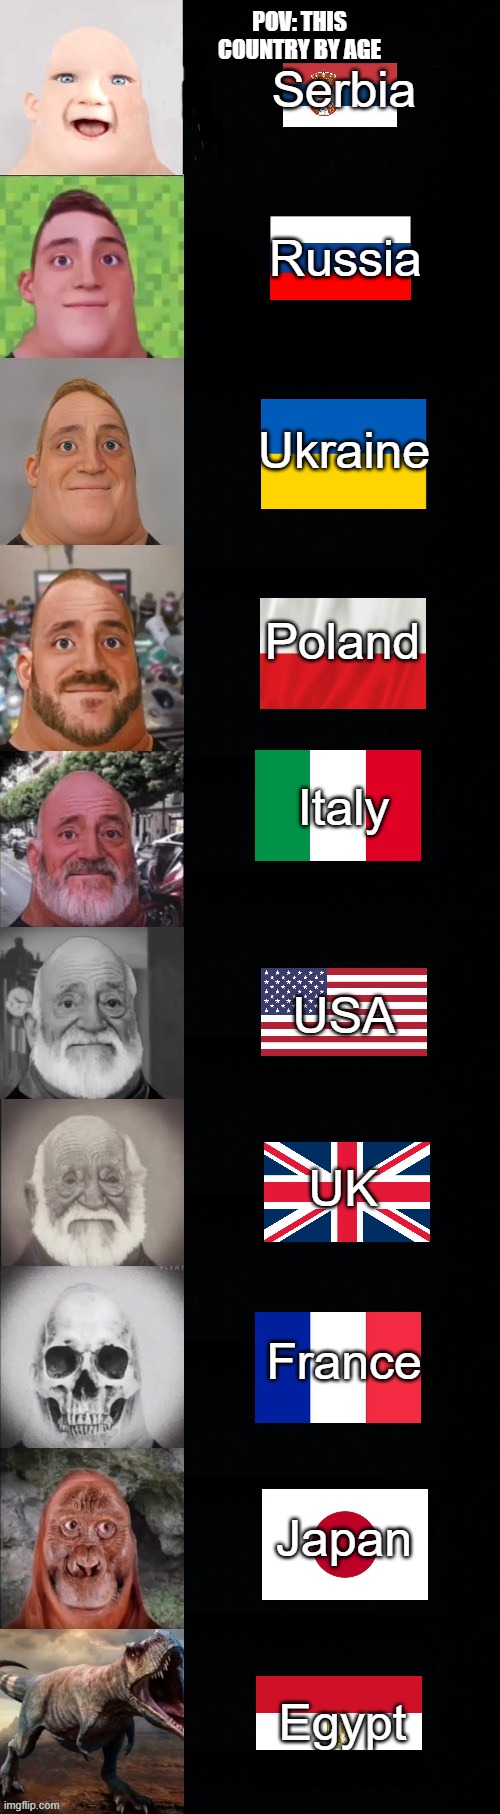 Mr Incredible becoming old | POV: THIS COUNTRY BY AGE; Serbia; Russia; Ukraine; Poland; Italy; USA; UK; France; Japan; Egypt | image tagged in mr incredible becoming old | made w/ Imgflip meme maker